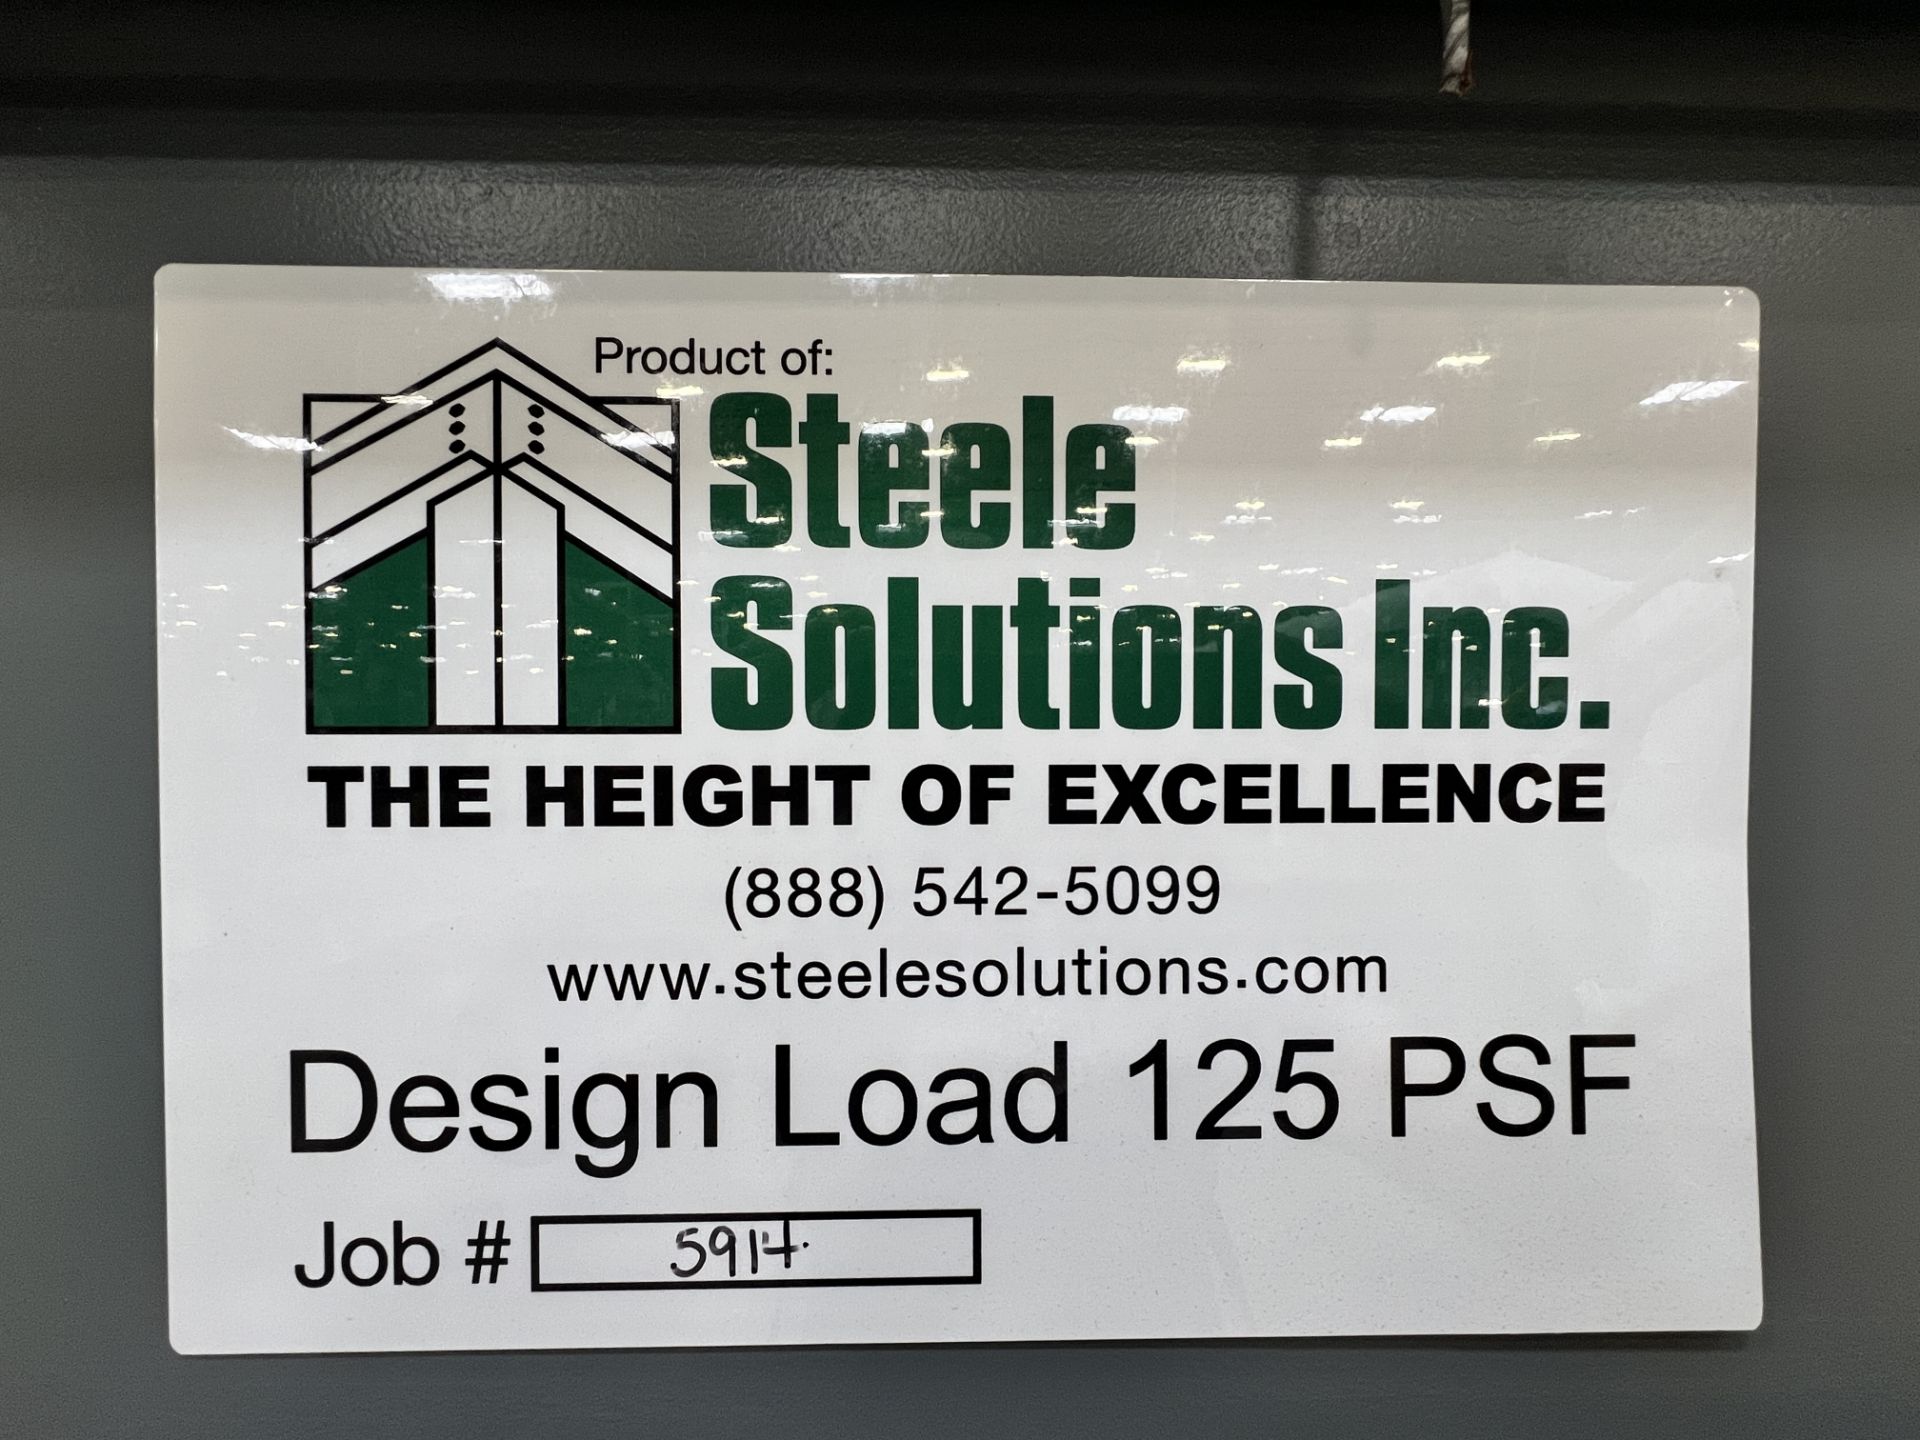 Steele Solutions Crossover - Image 6 of 11